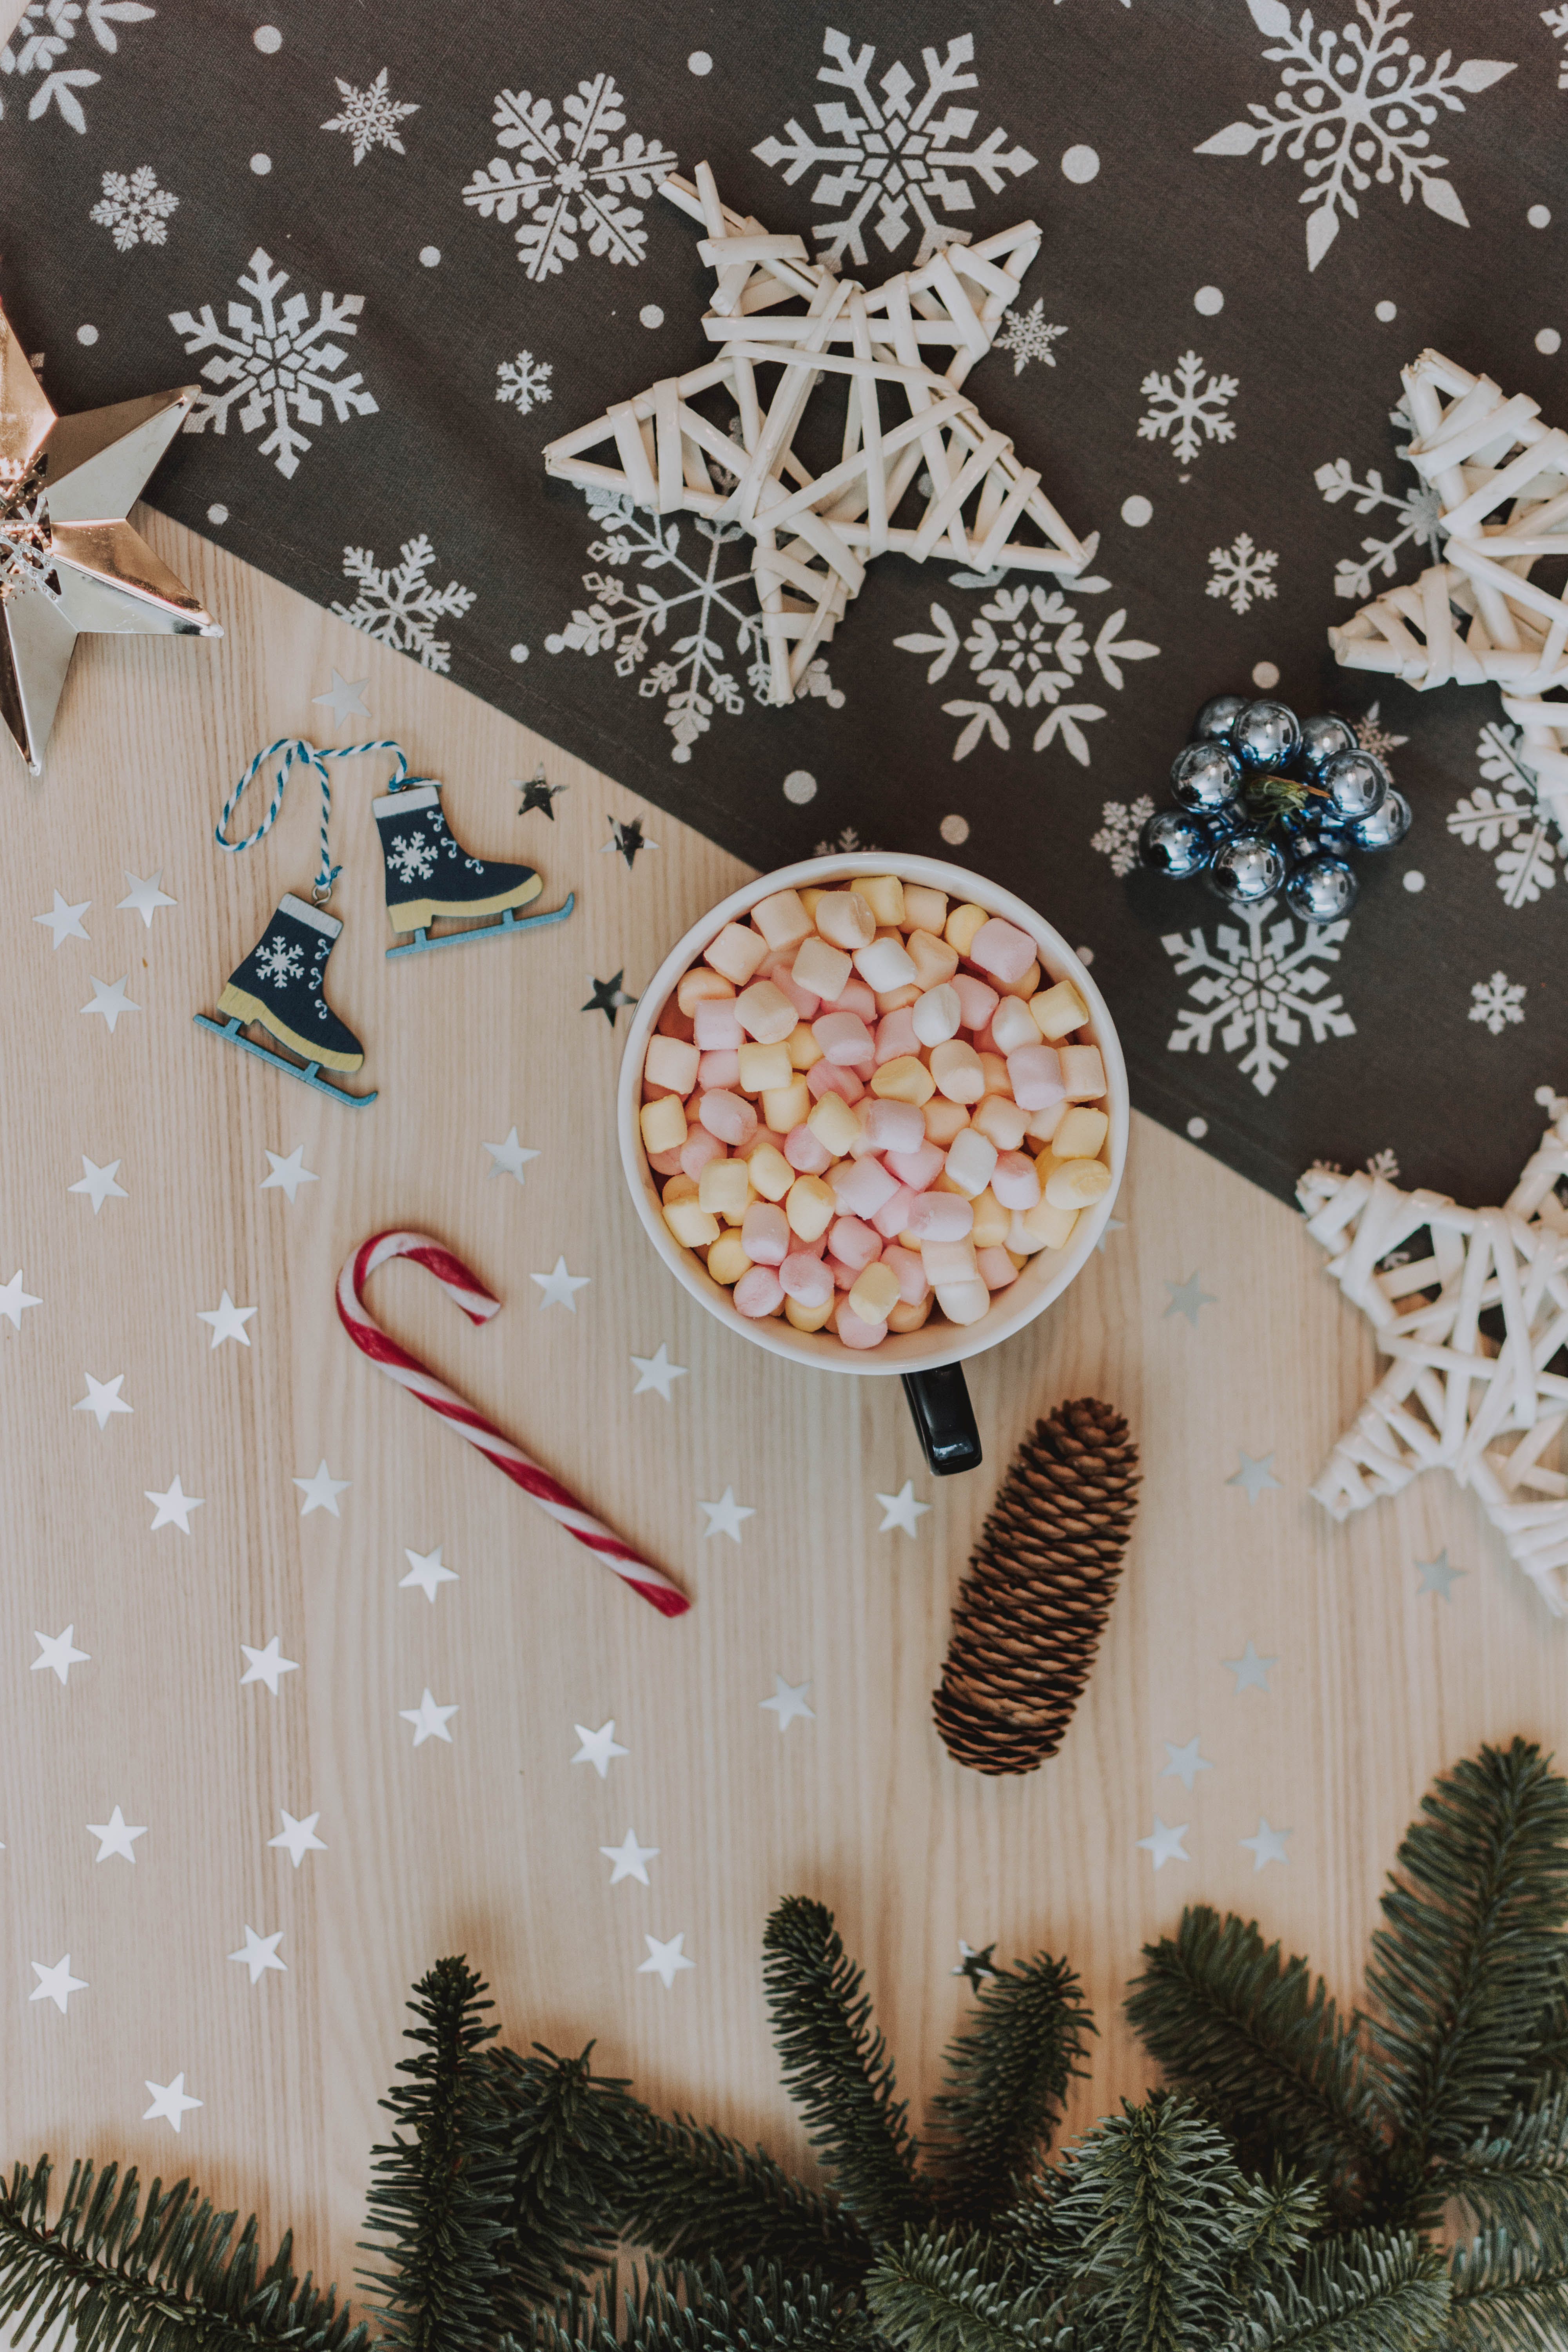 There are decorative snowflakes, Christmas decorations and a mug with marshmallows on the table